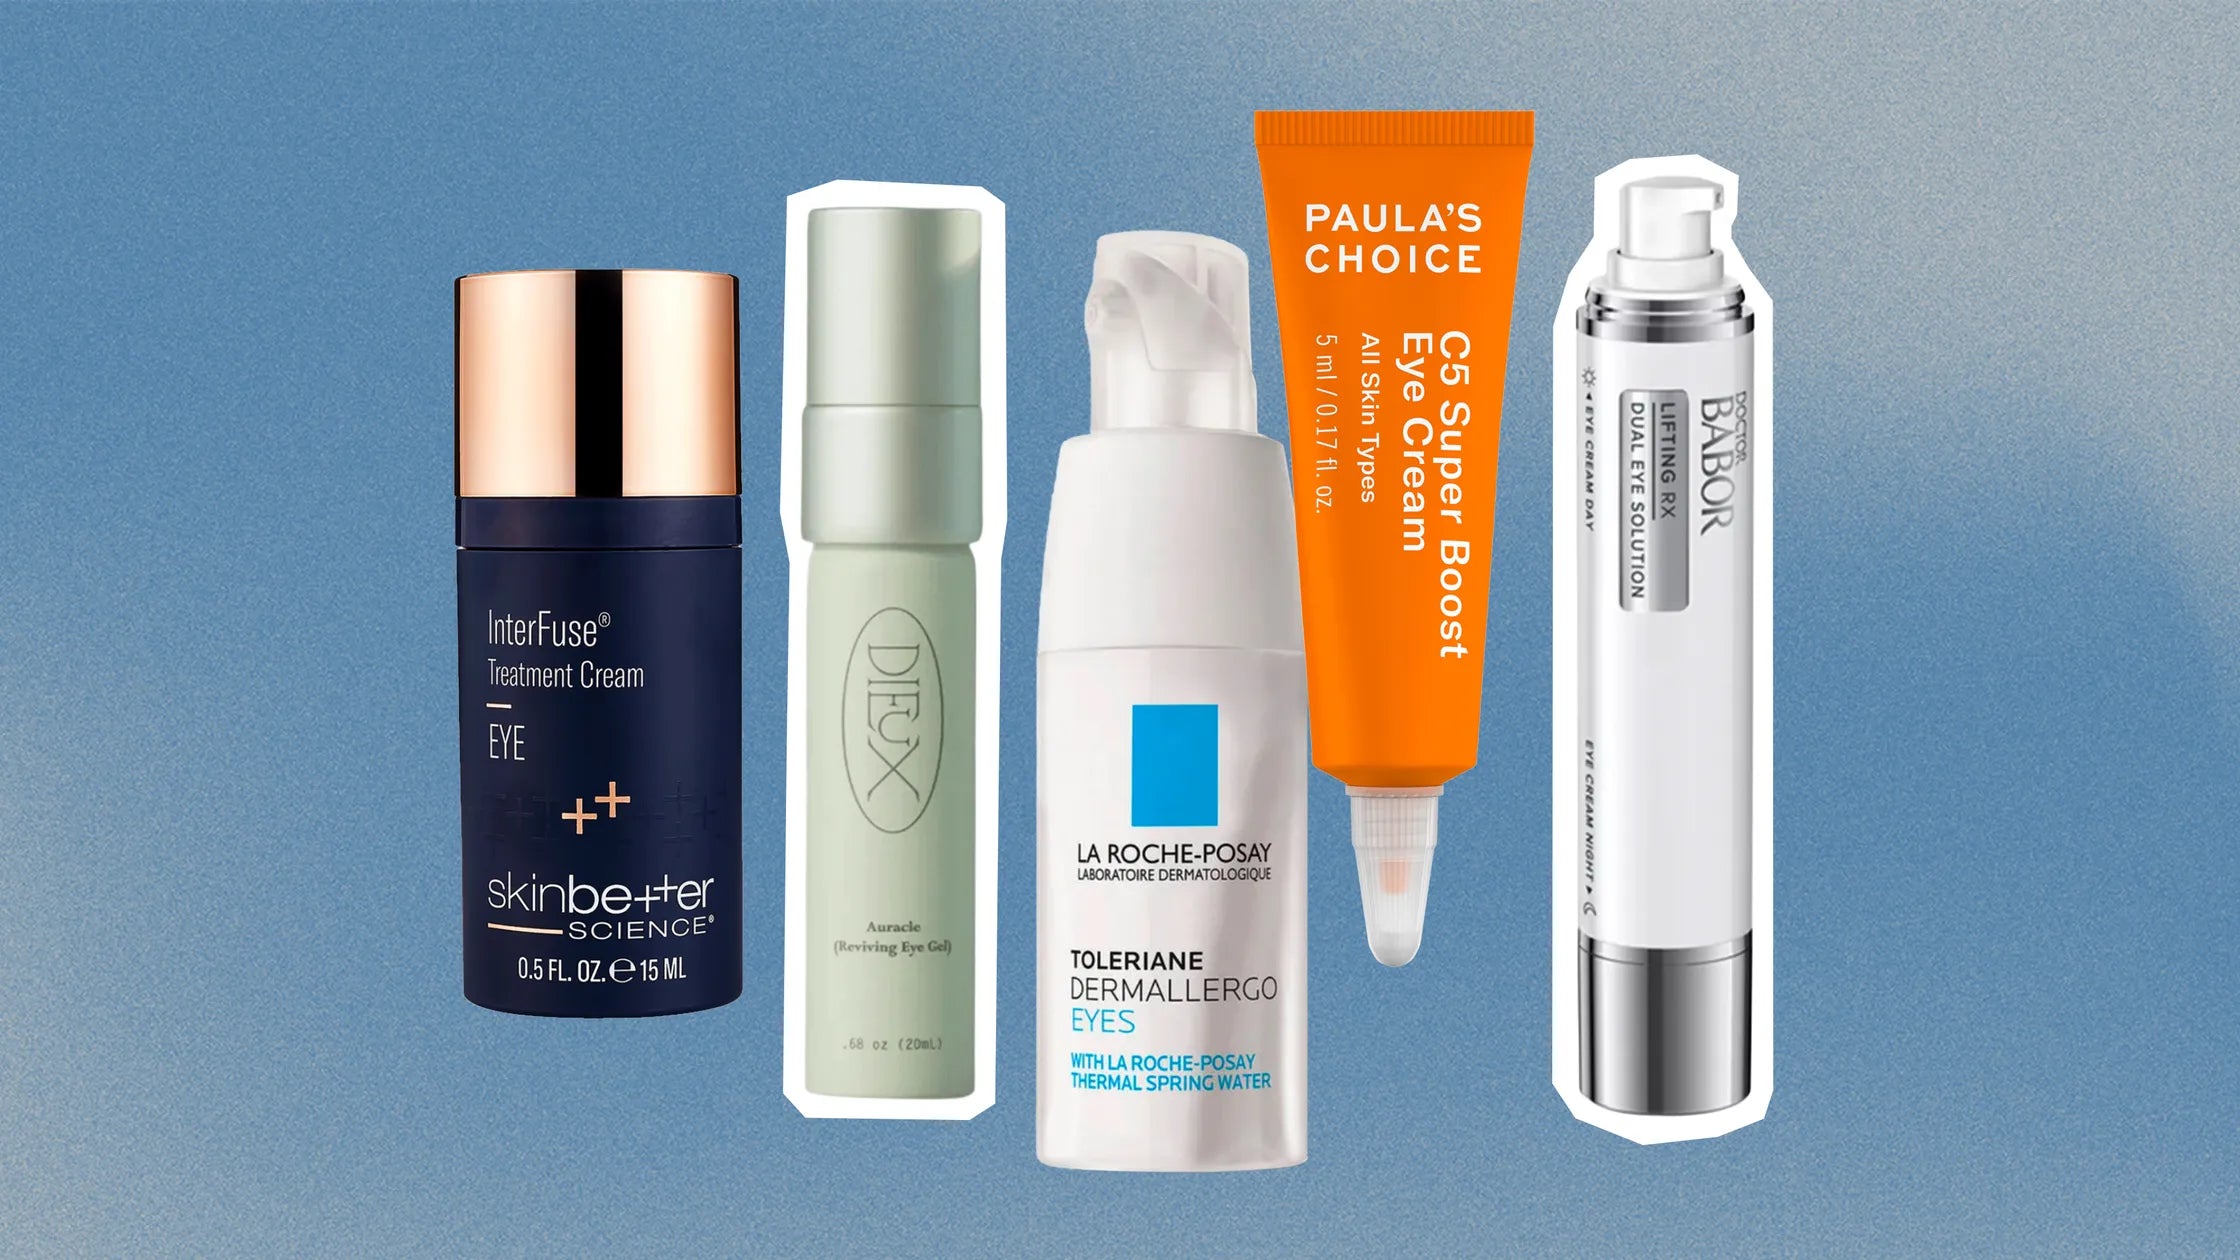 GLAMOUR: The 21 Best Eye Creams for Mature Skin, According to Experts